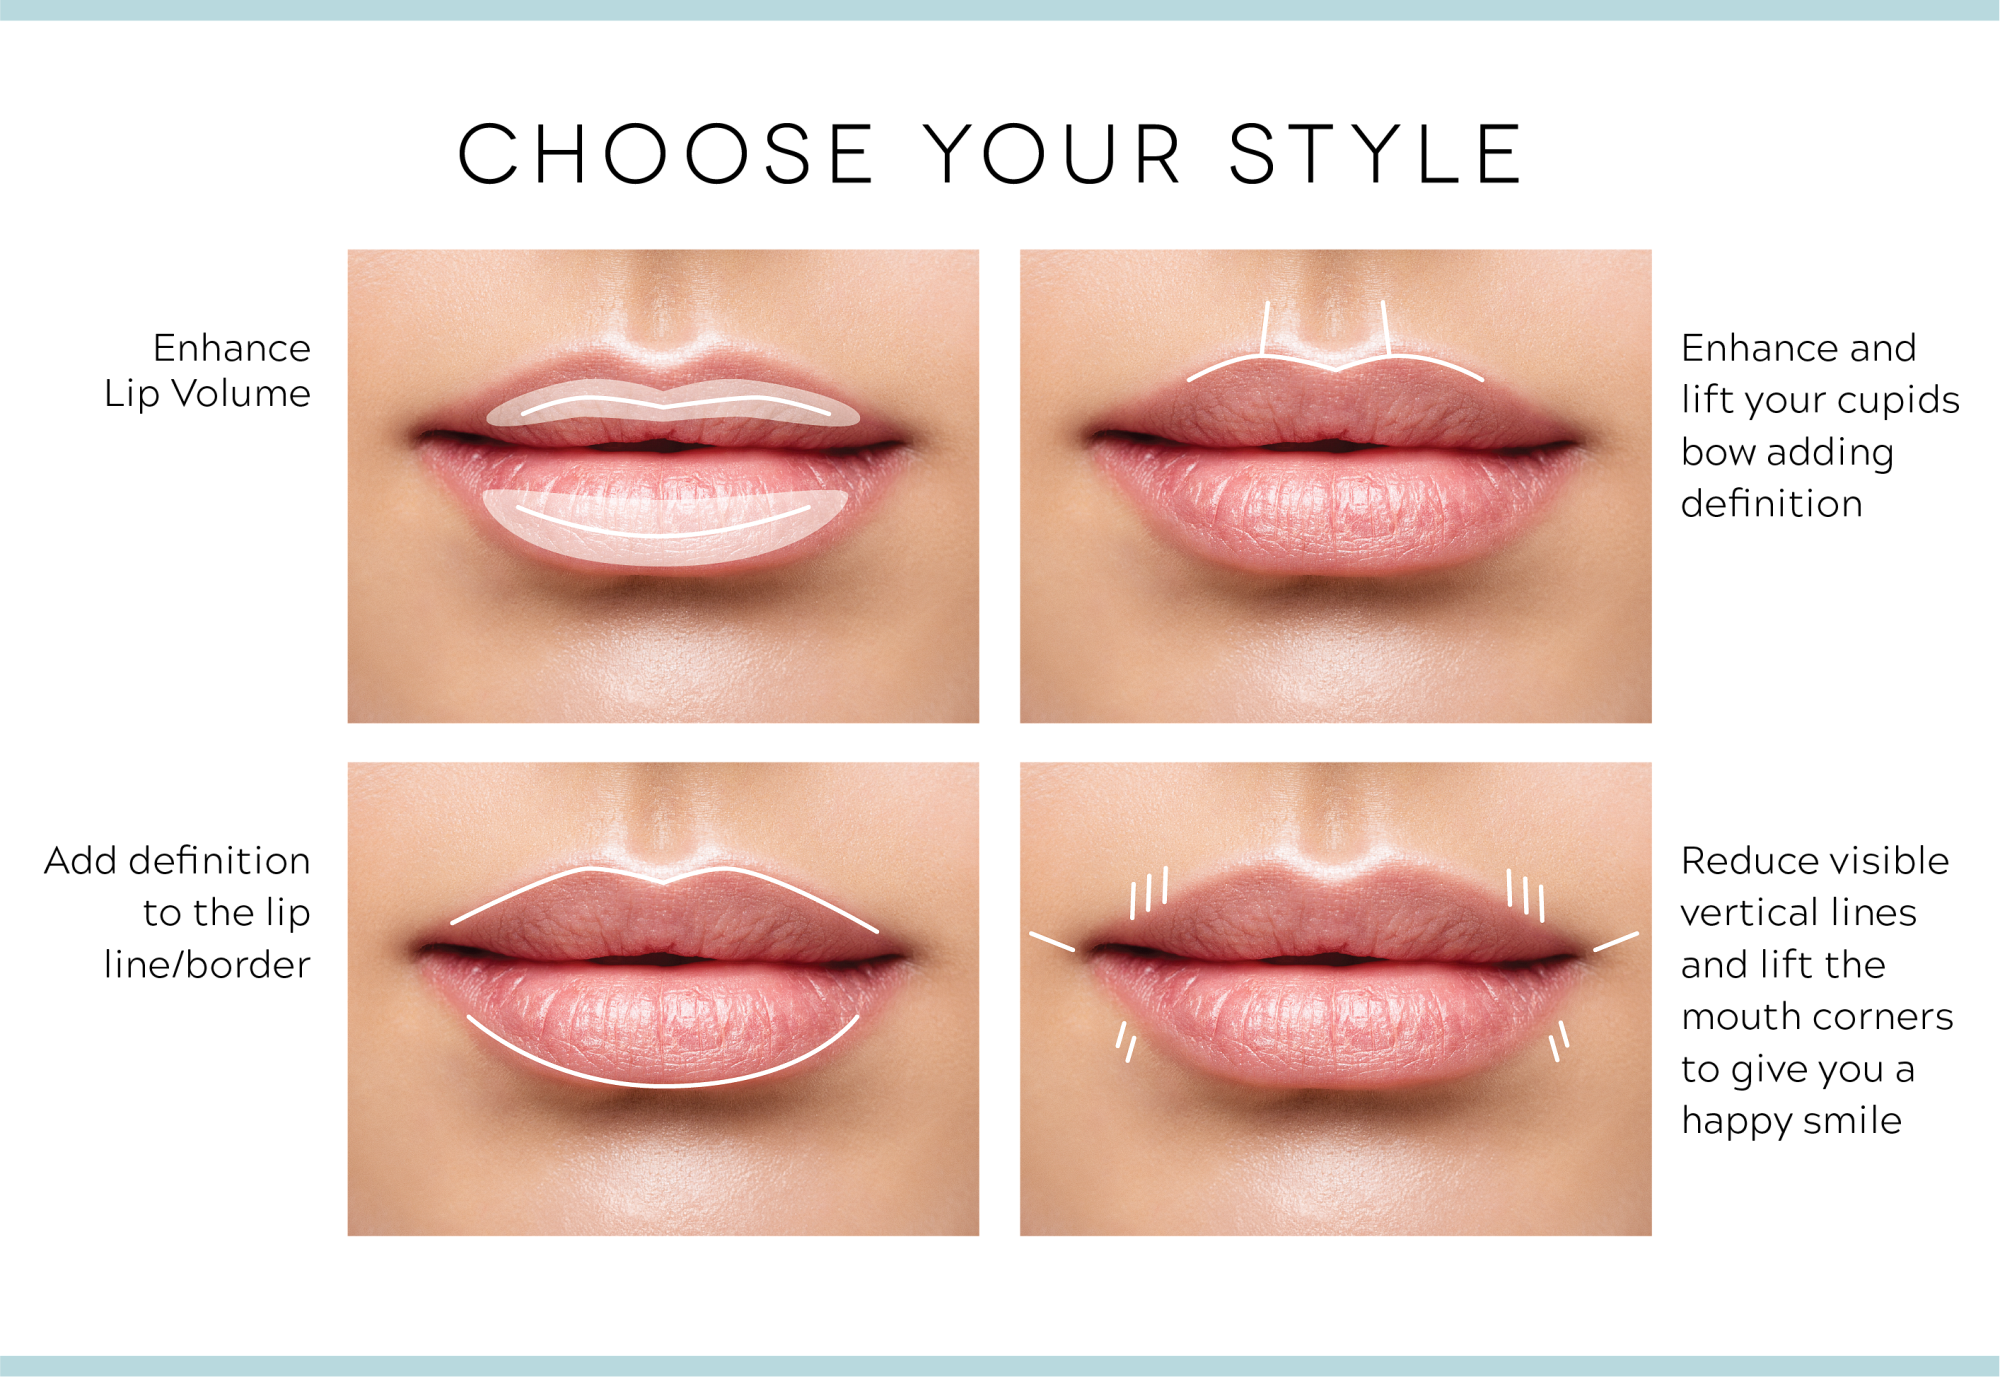 Choose Your Style - Enhance Lip Volume, Engance and lift your cupids bow adding definition, add definition to the lip line / border, Reduce visible verticle lines and lift the mouth corners to give you a happy smile.